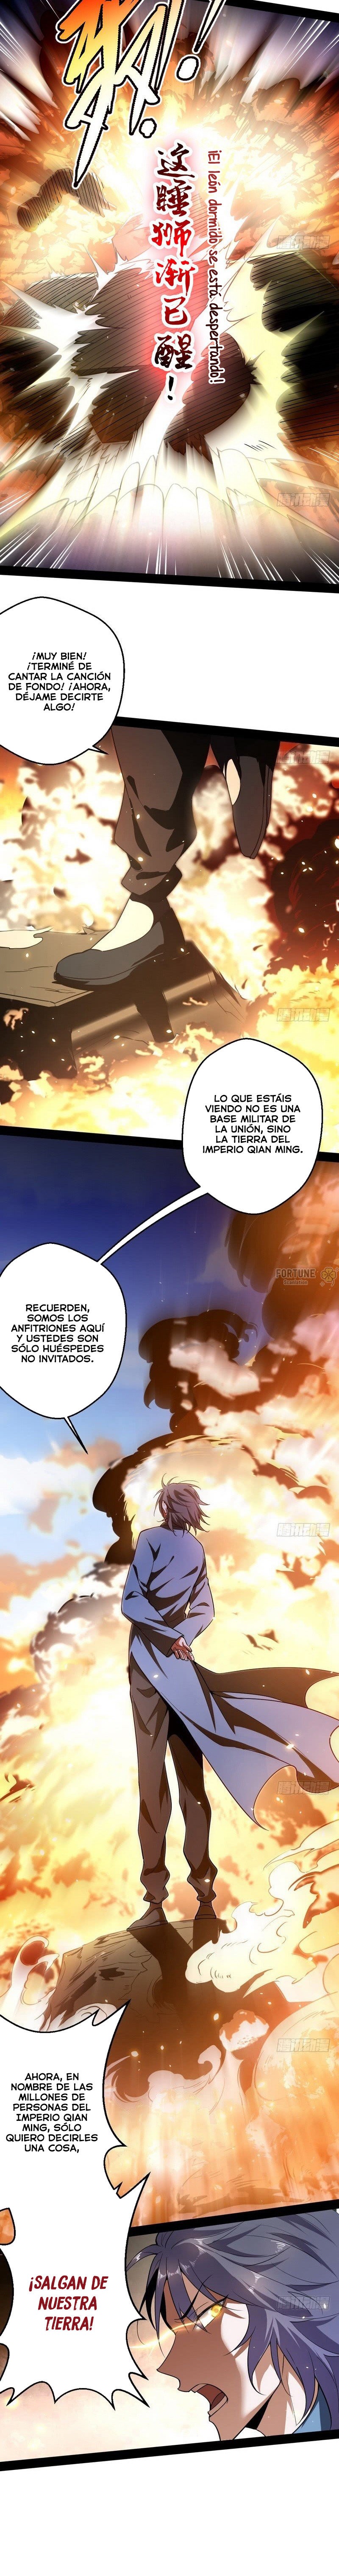 Manga Soy un dios maligno Chapter 22 image number 7